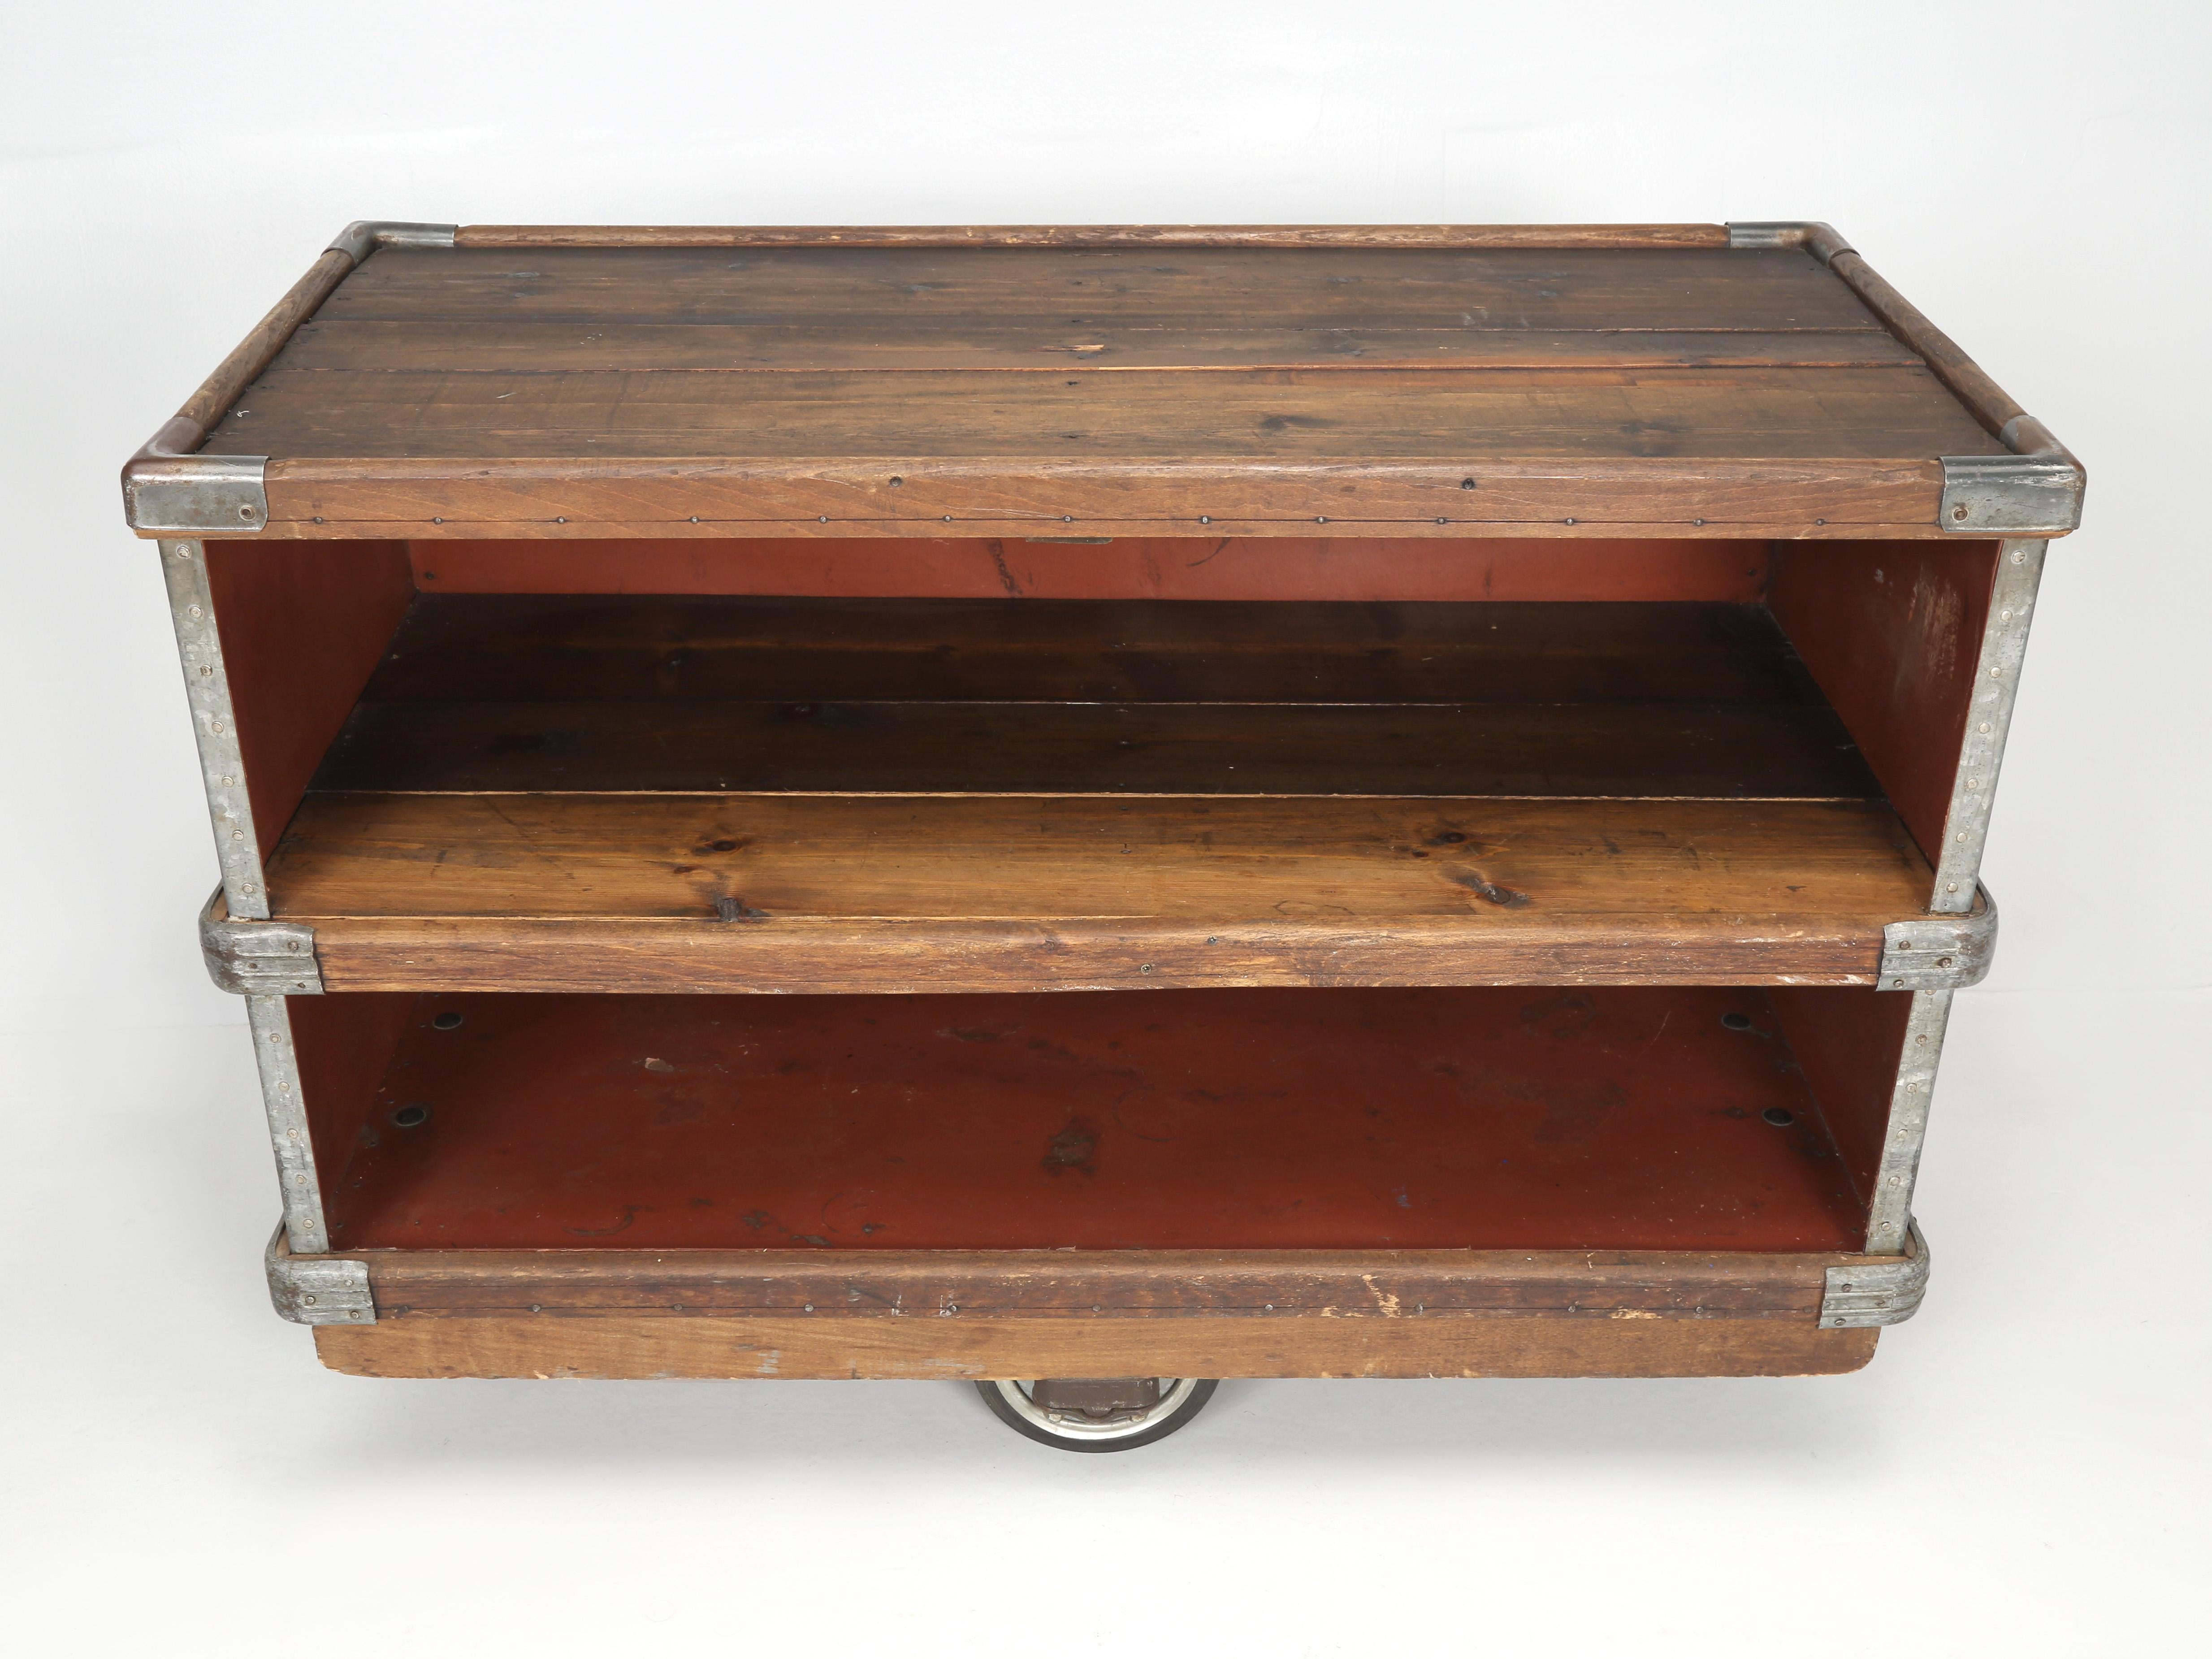 Steel Suroy Industrial Cart on Wheels or Potentially a Sensational Movable Bar Cart